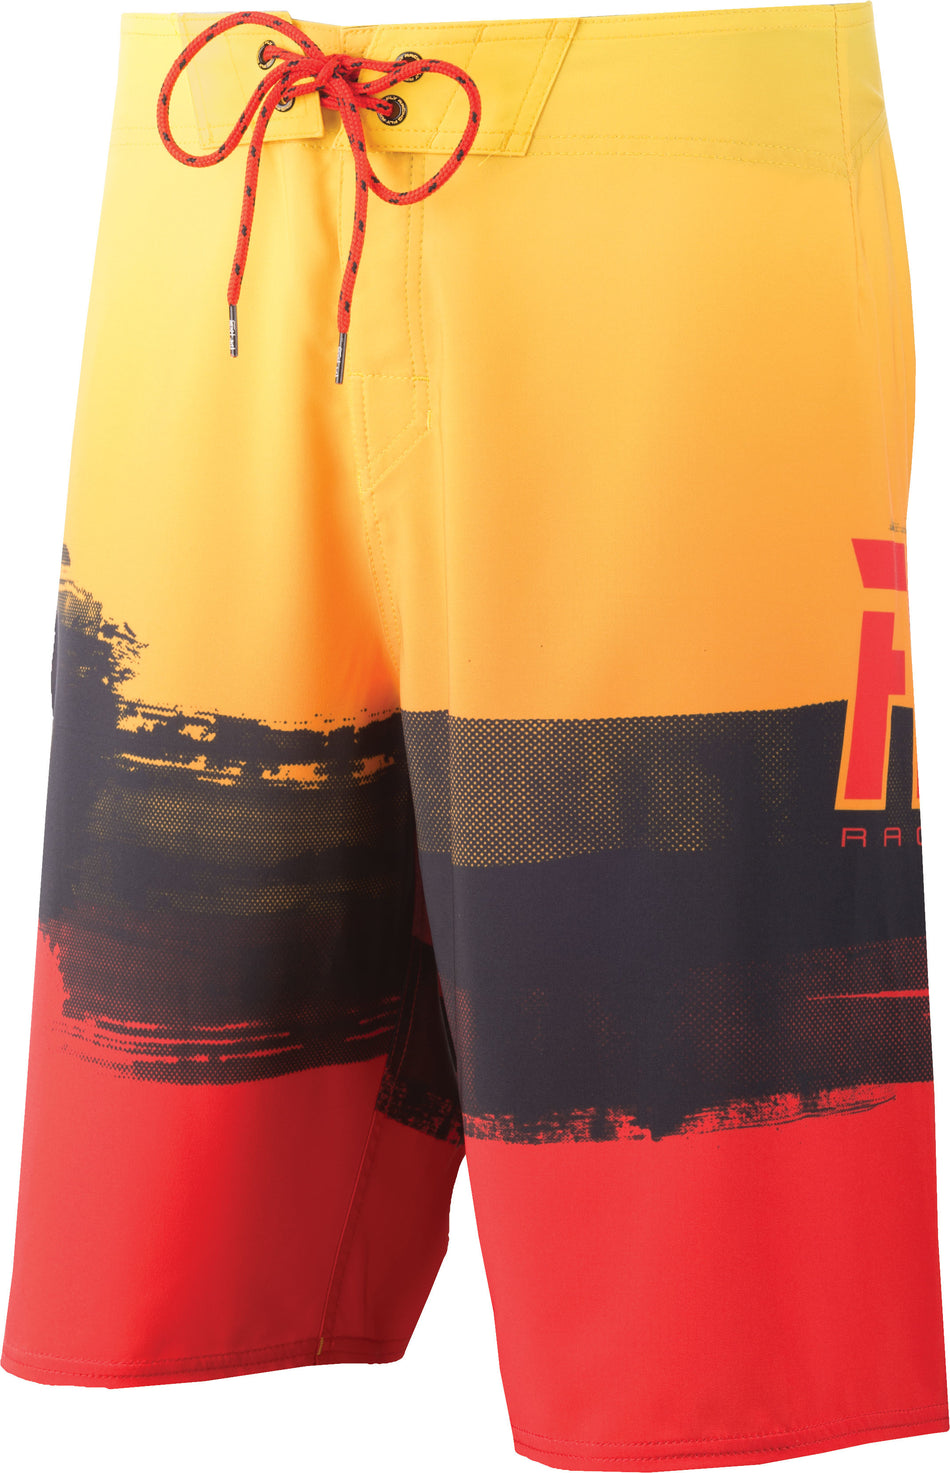 FLY RACING Fly Paint Slinger Boardshorts Red/Yellow Sz 30 353-19430